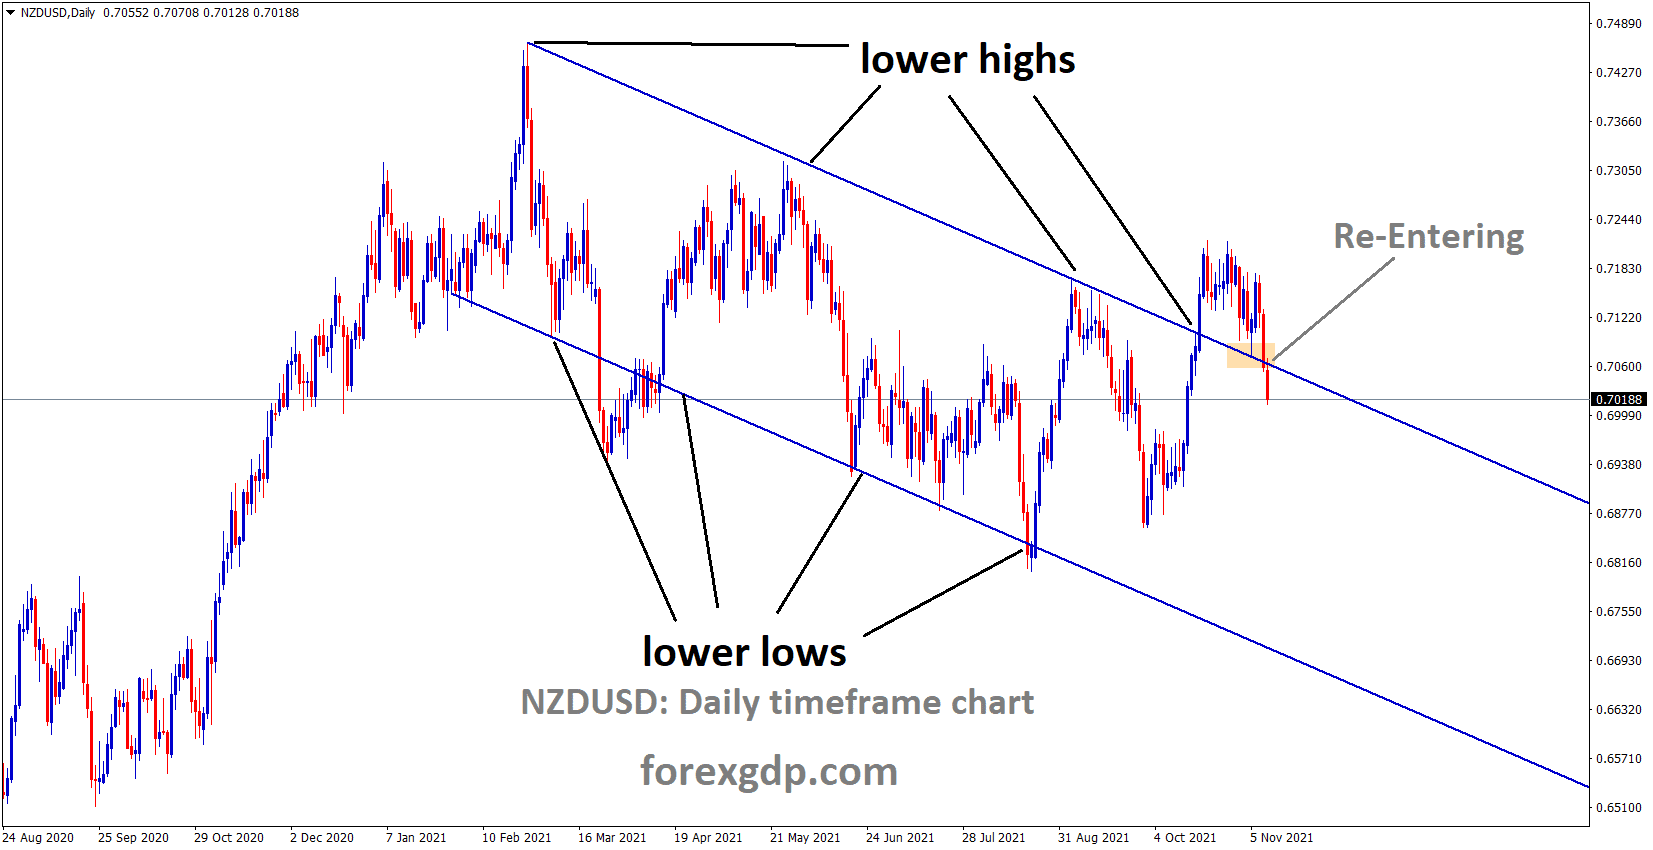 NZDUSD is moving in the Descending channel